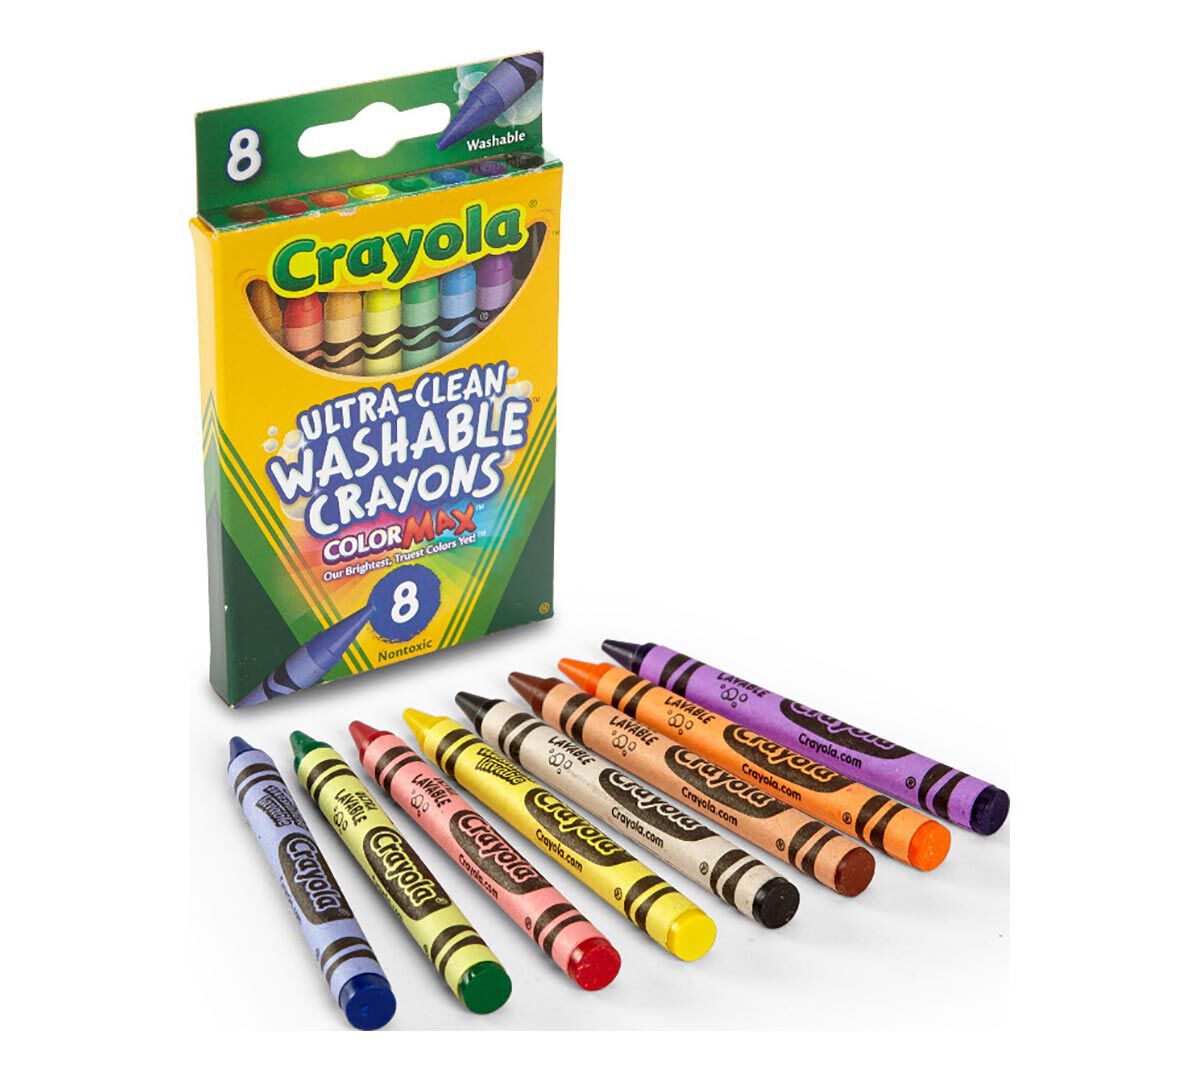 NEW Crayola Large Washable Crayons 8 Assorted Colors 4 Pack 